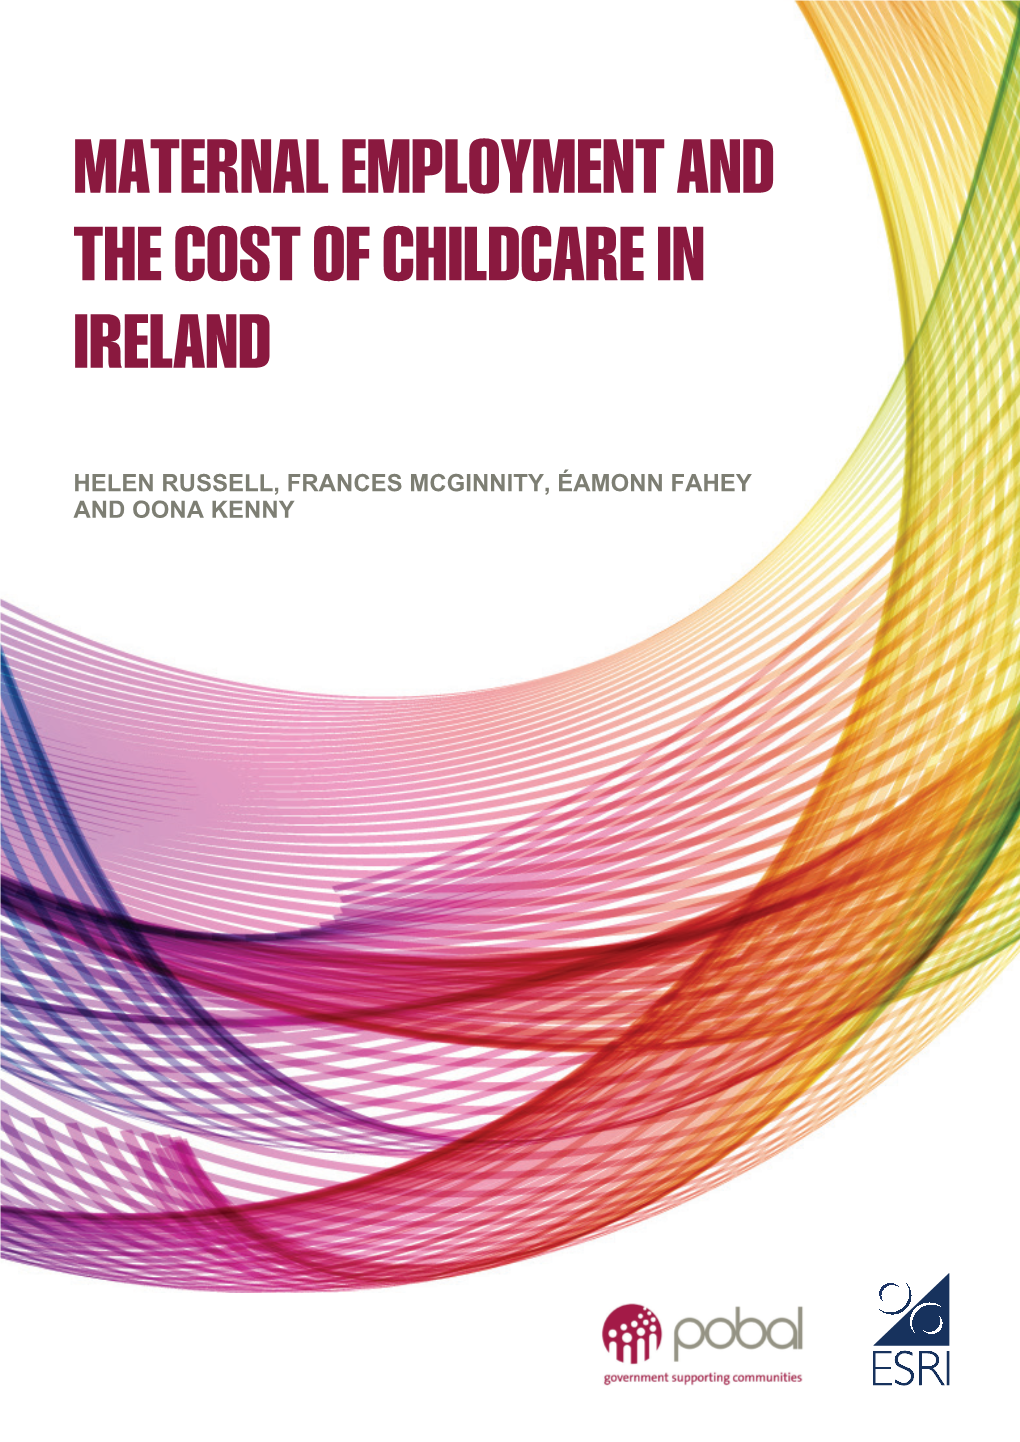 Maternal Employment and the Cost of Childcare in Ireland